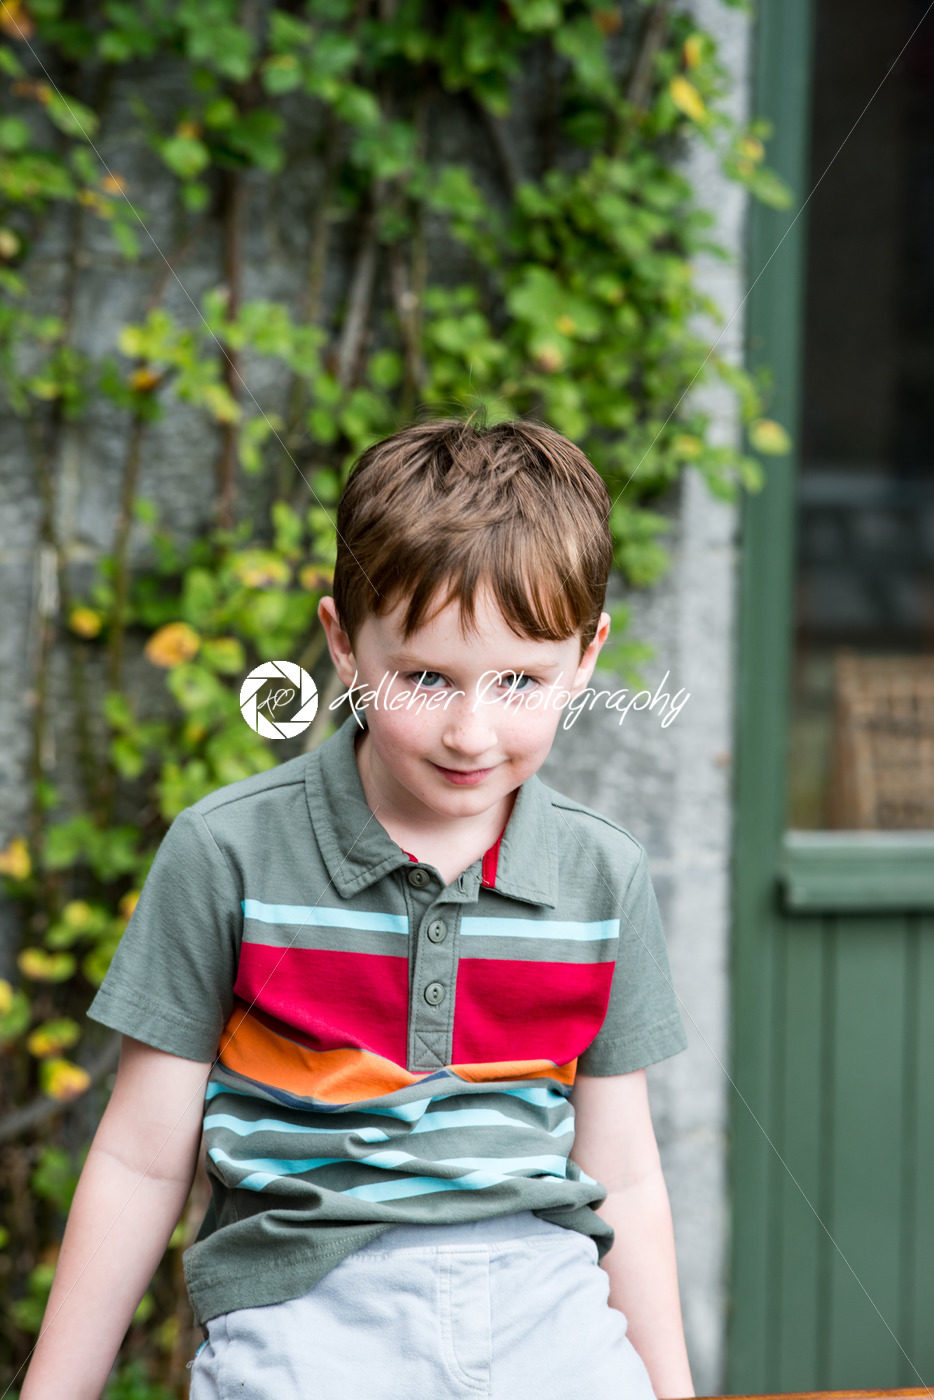 Young little boy portrait sitting down looking at camera - Kelleher Photography Store